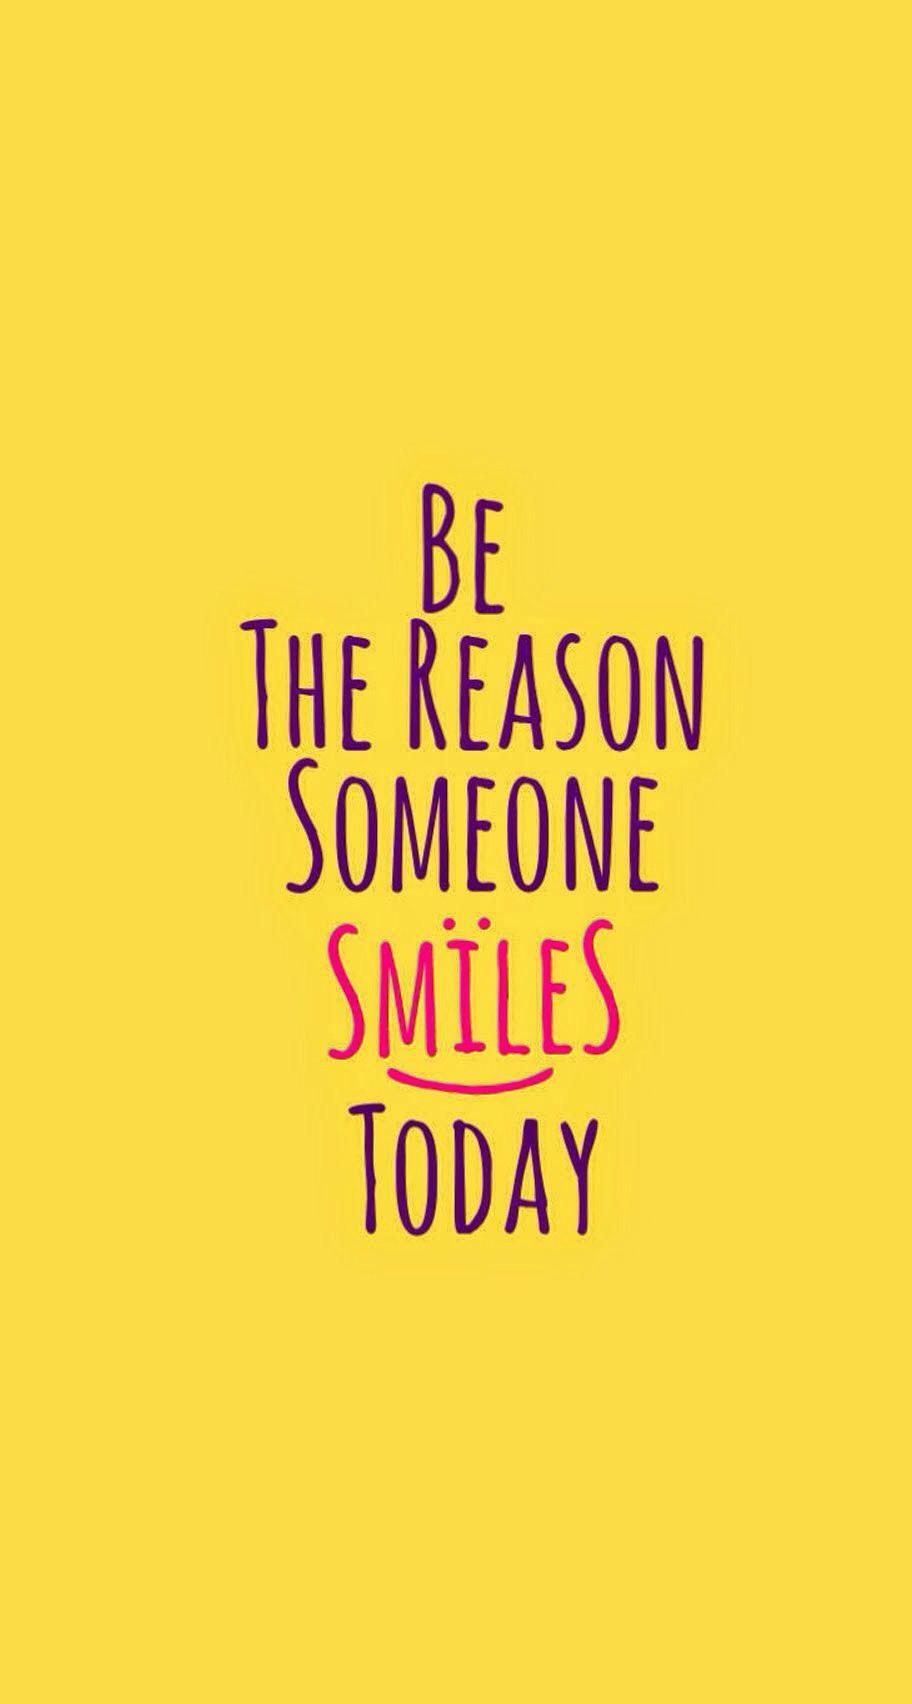 Smile Quotes Wallpaper Hd